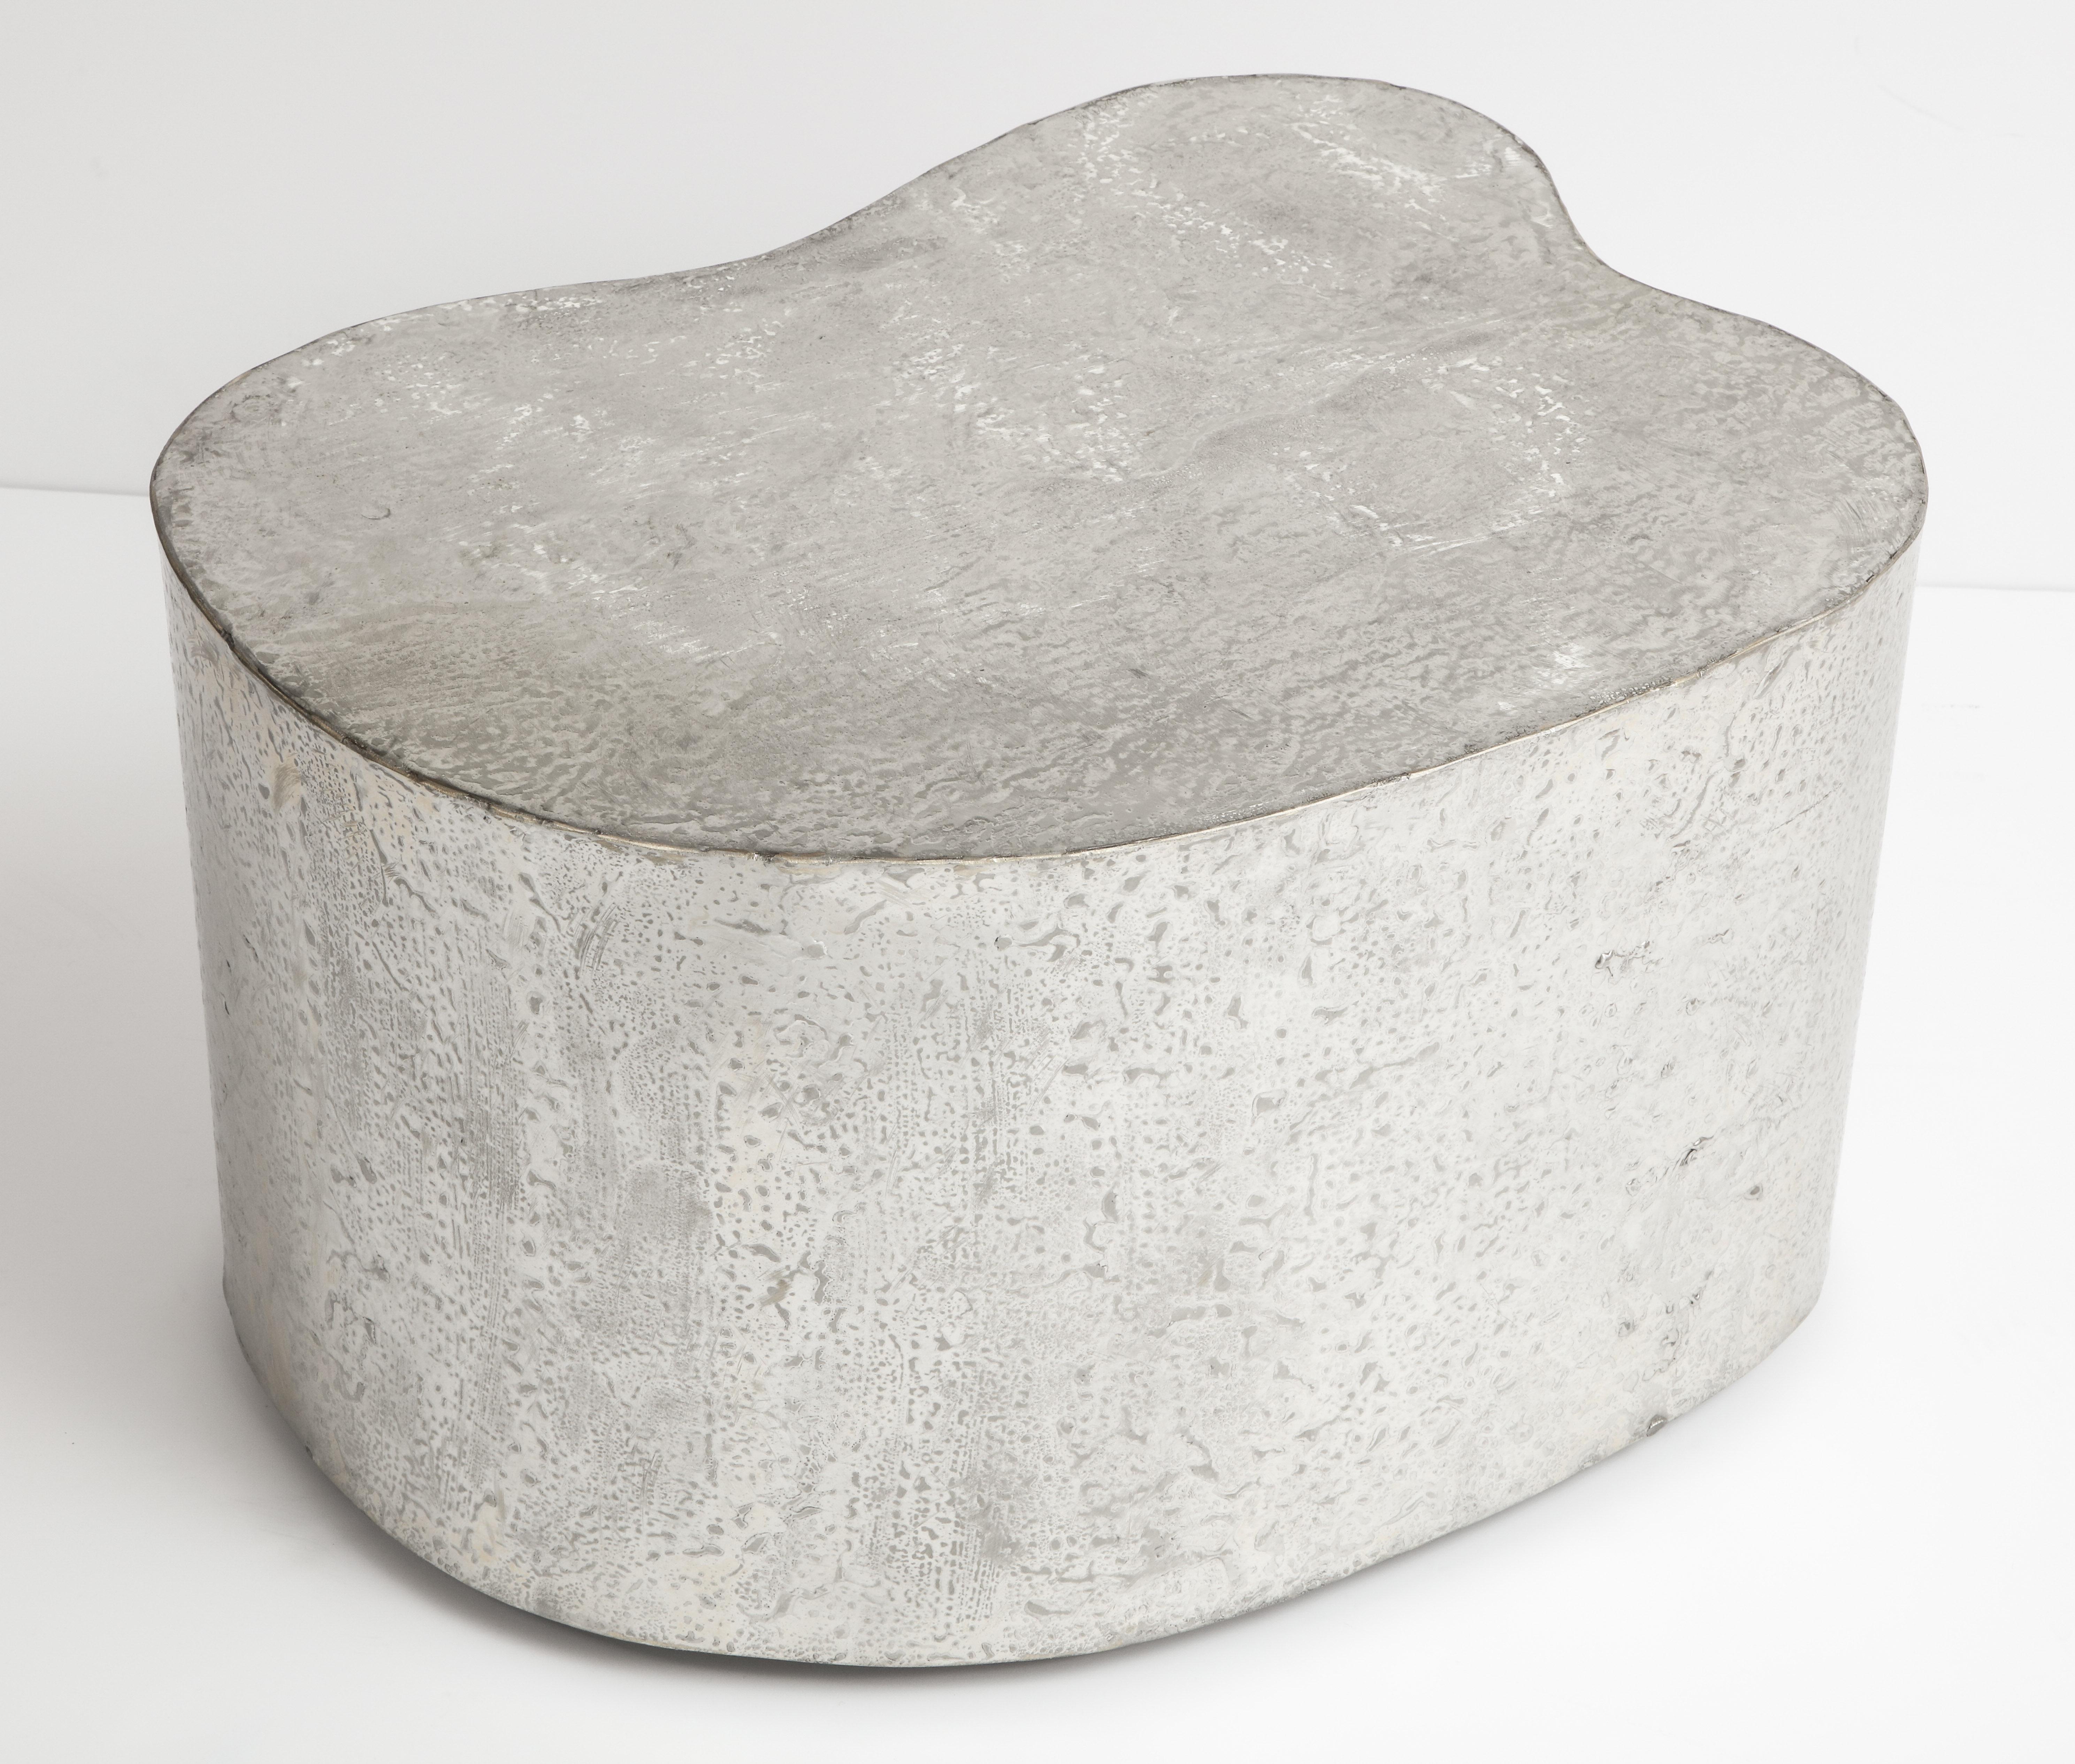 Silas Seandel freeform side table, pewter signed. Organic form brass side table with pewter finish and handwrought popcorn textured surface. Engraved signature, 